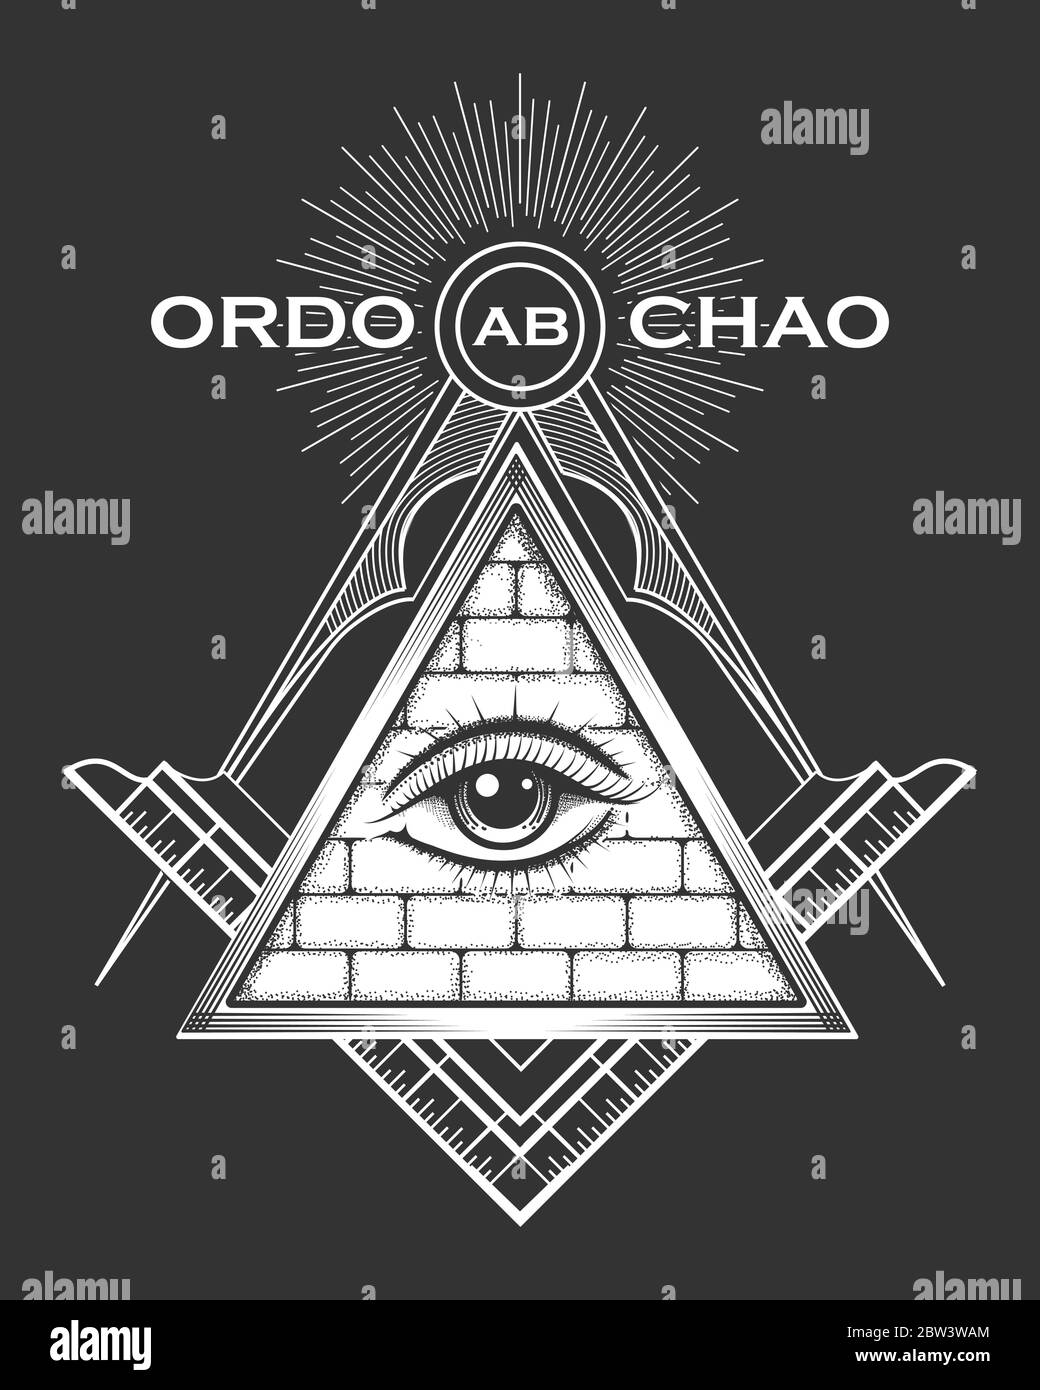 pypamid-with-all-seeing-eye-mystic-occult-esoteric-symbol-with-latin-wording-ordo-ab-chao-what-means-order-from-chaos-vector-illustration-2BW3WAM.jpg